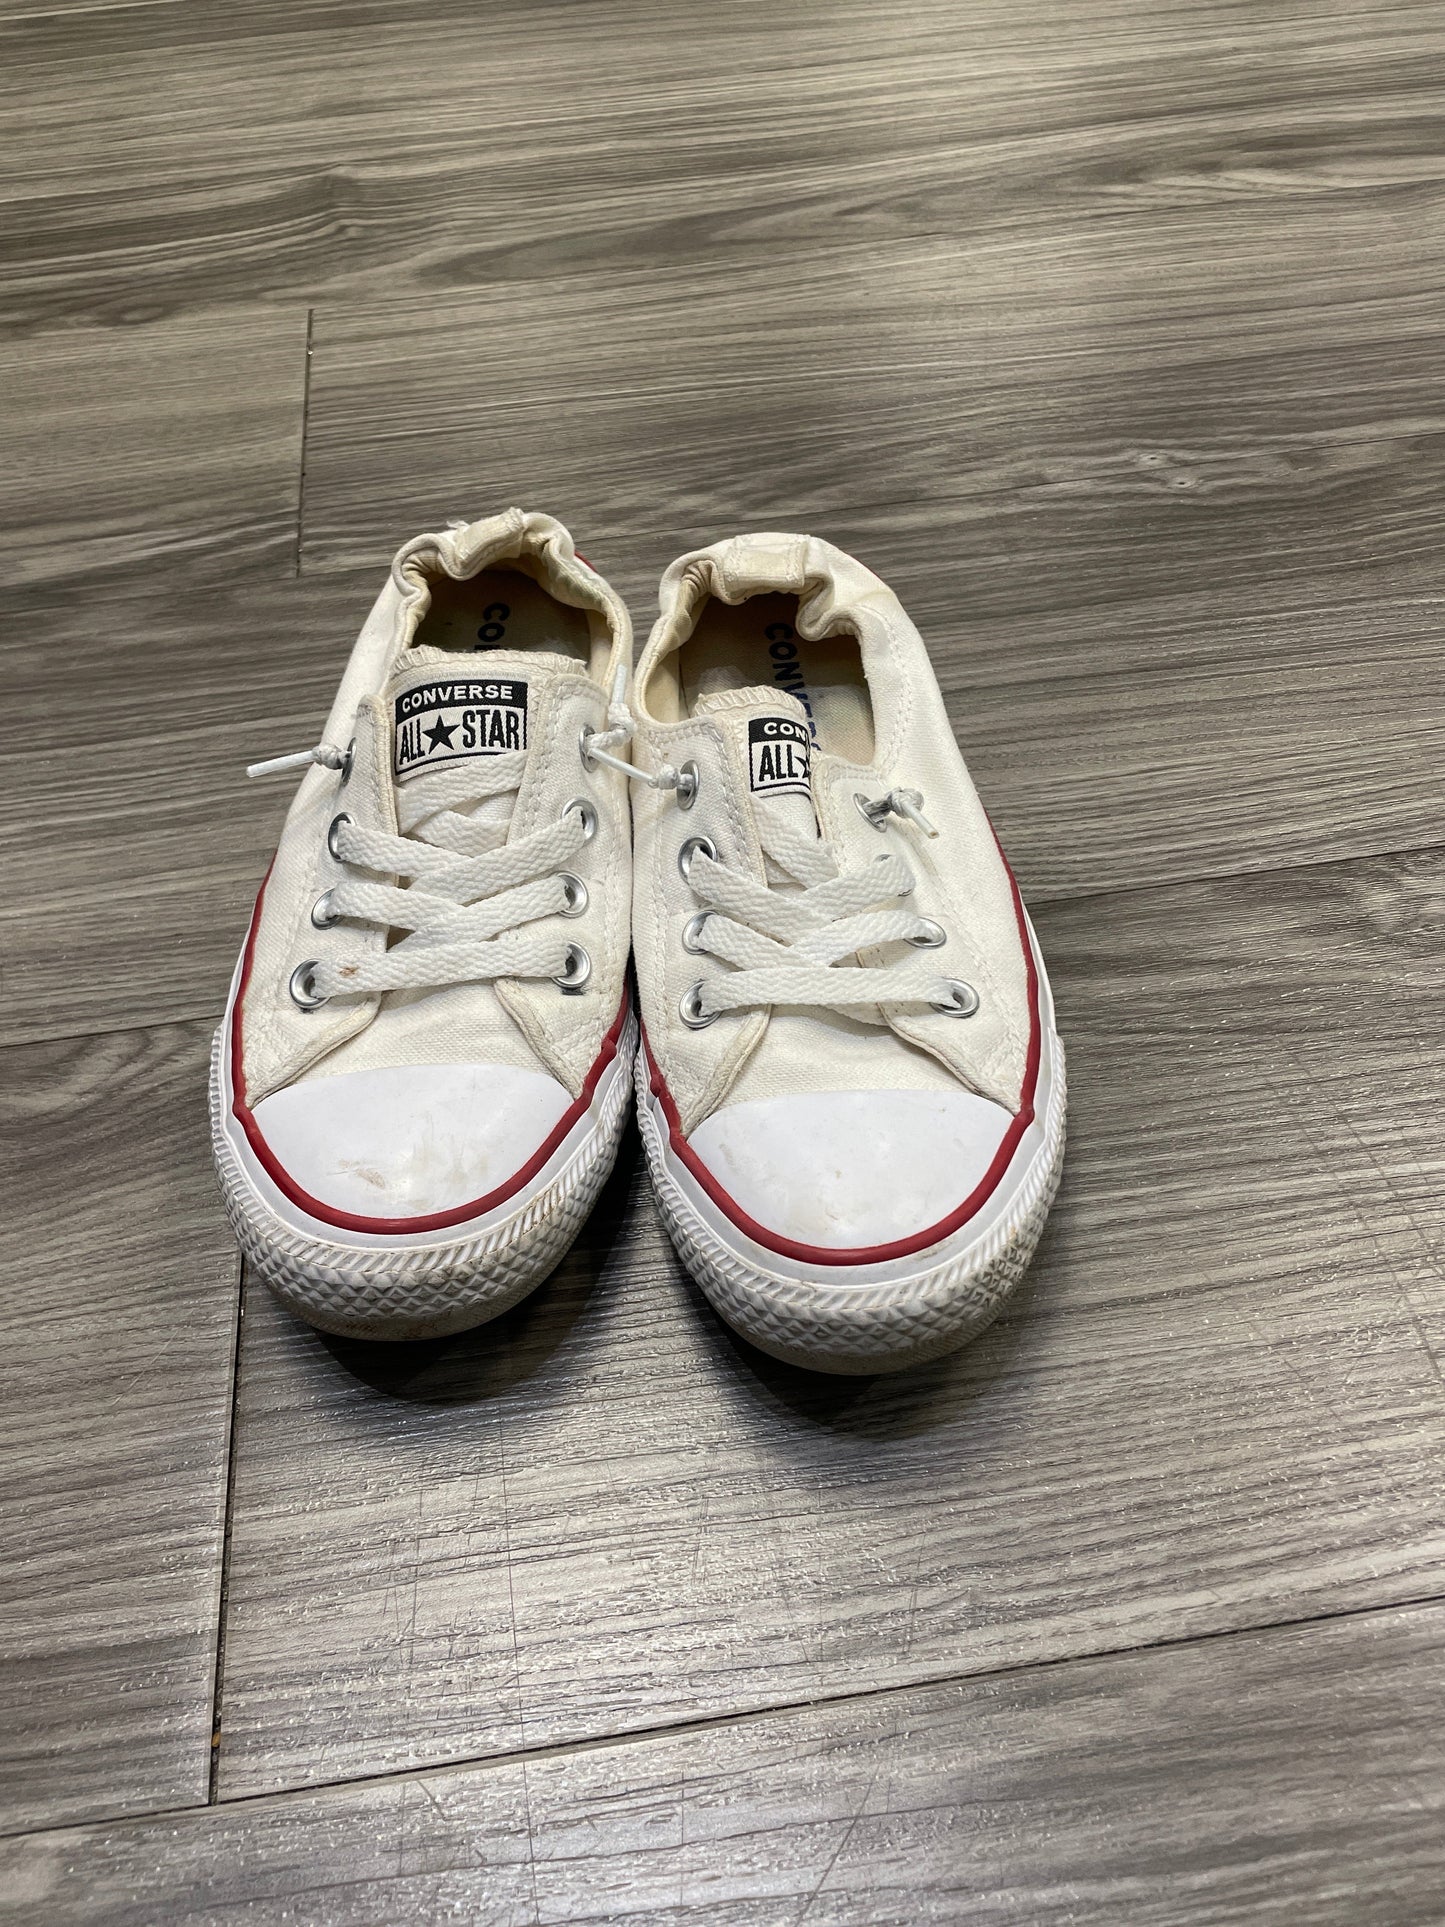 White Shoes Sneakers Converse, Size 7.5